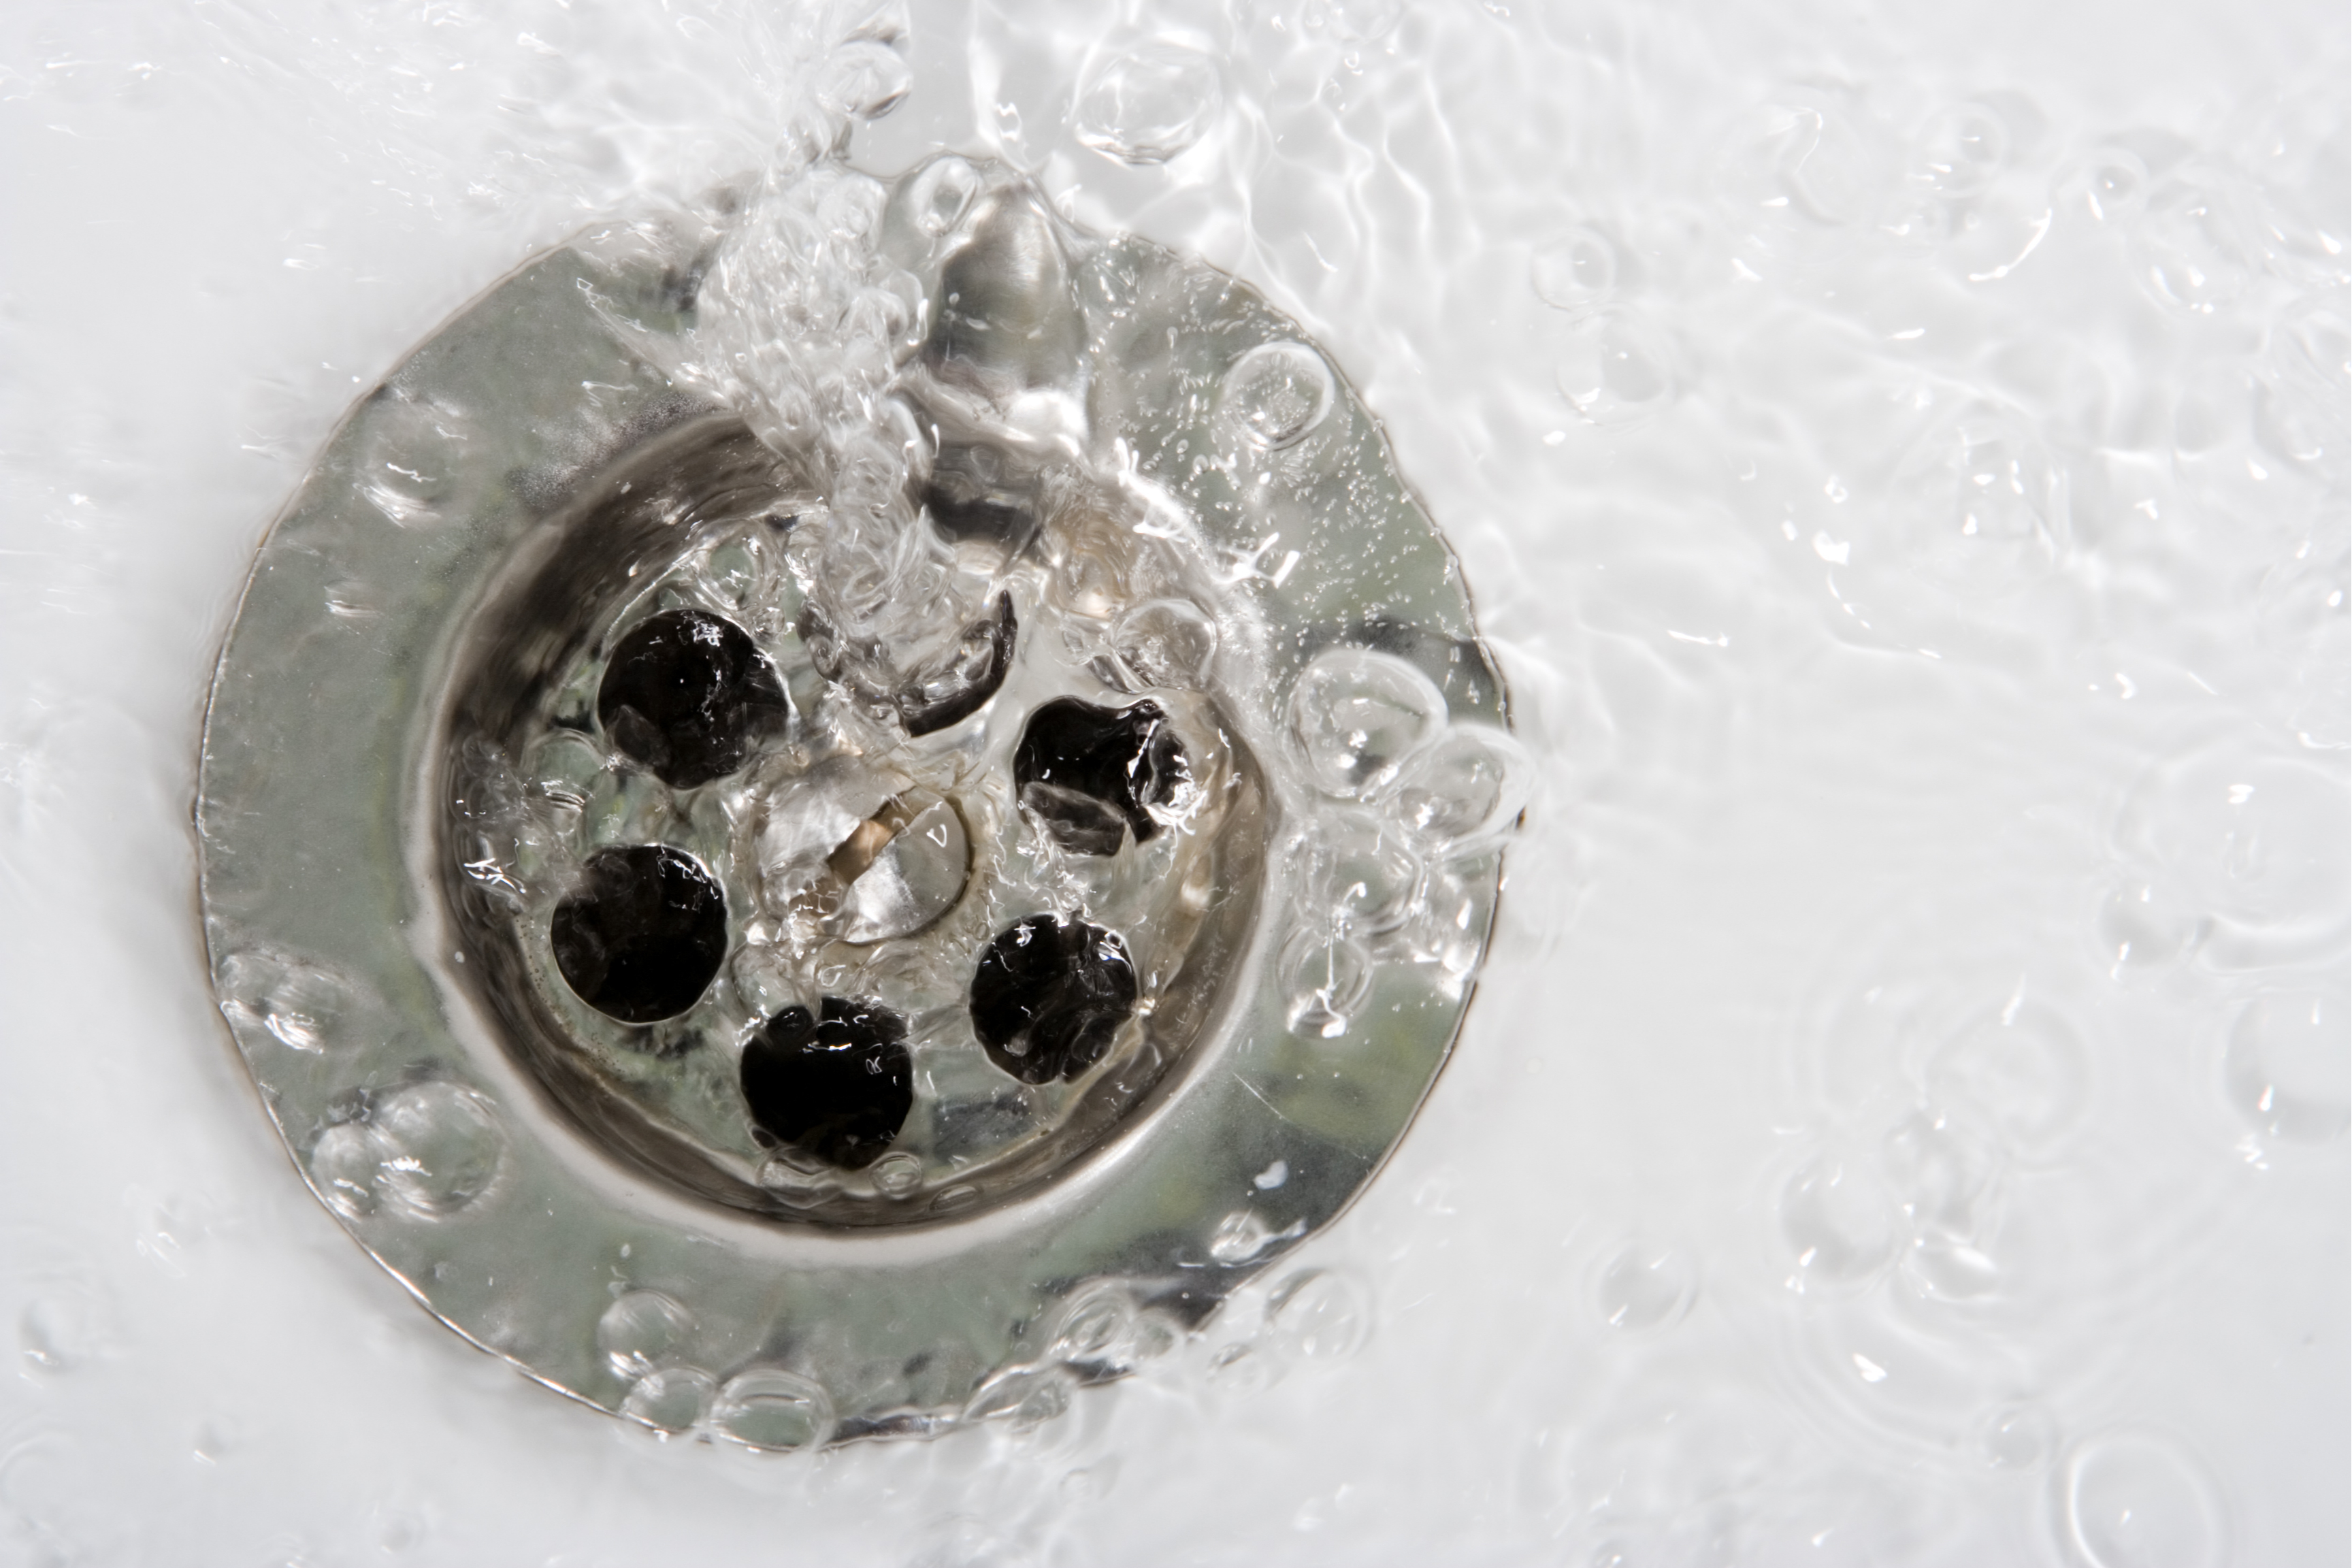 Bathroom Drain Cleaning, Manchester